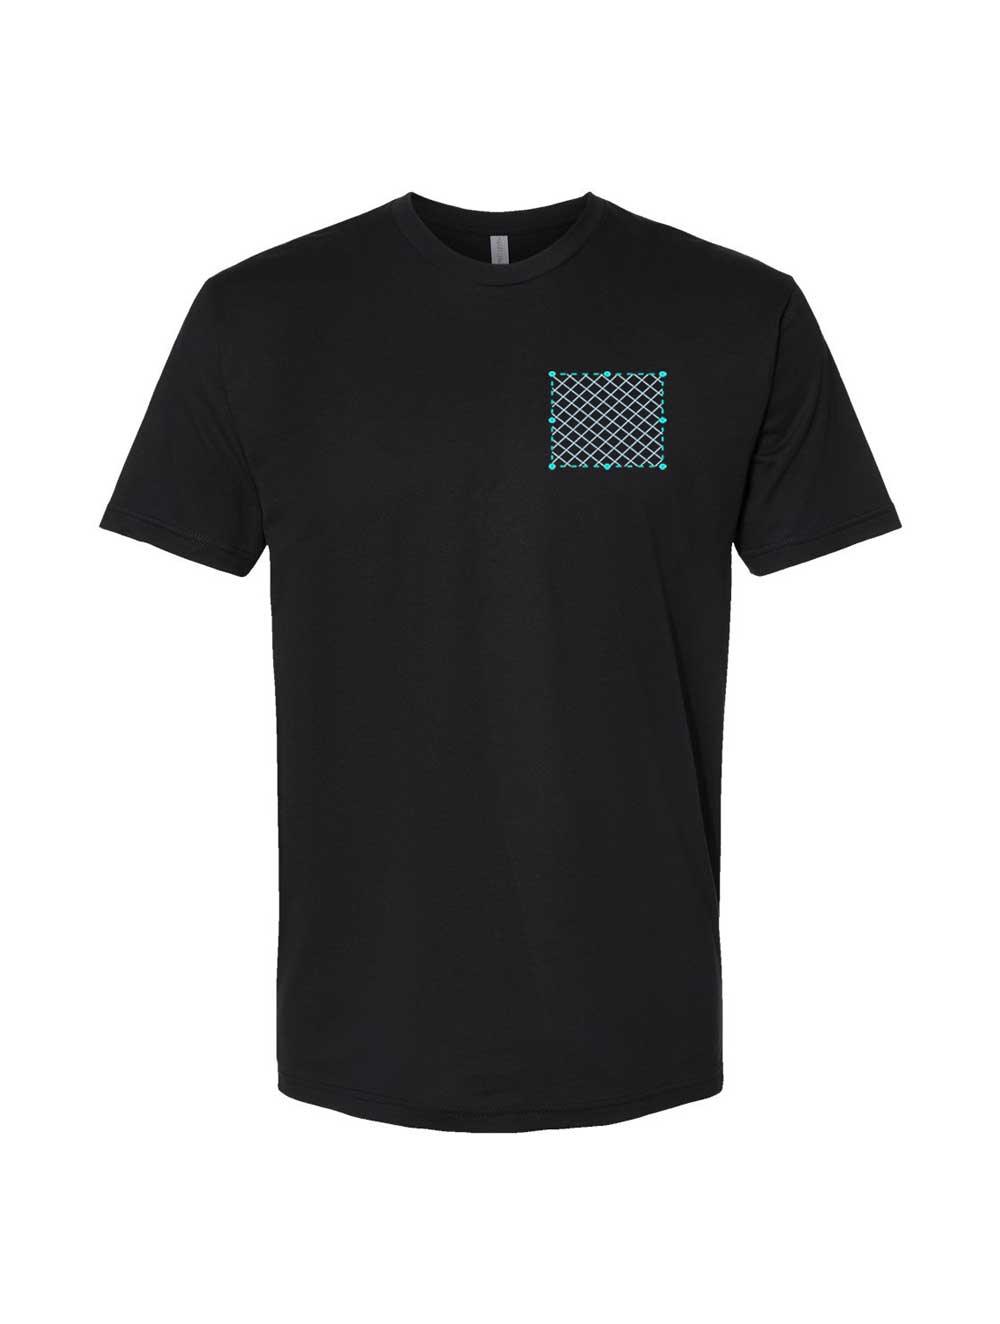 Embroidered Next Level T-Shirt - Constantly Create Shop